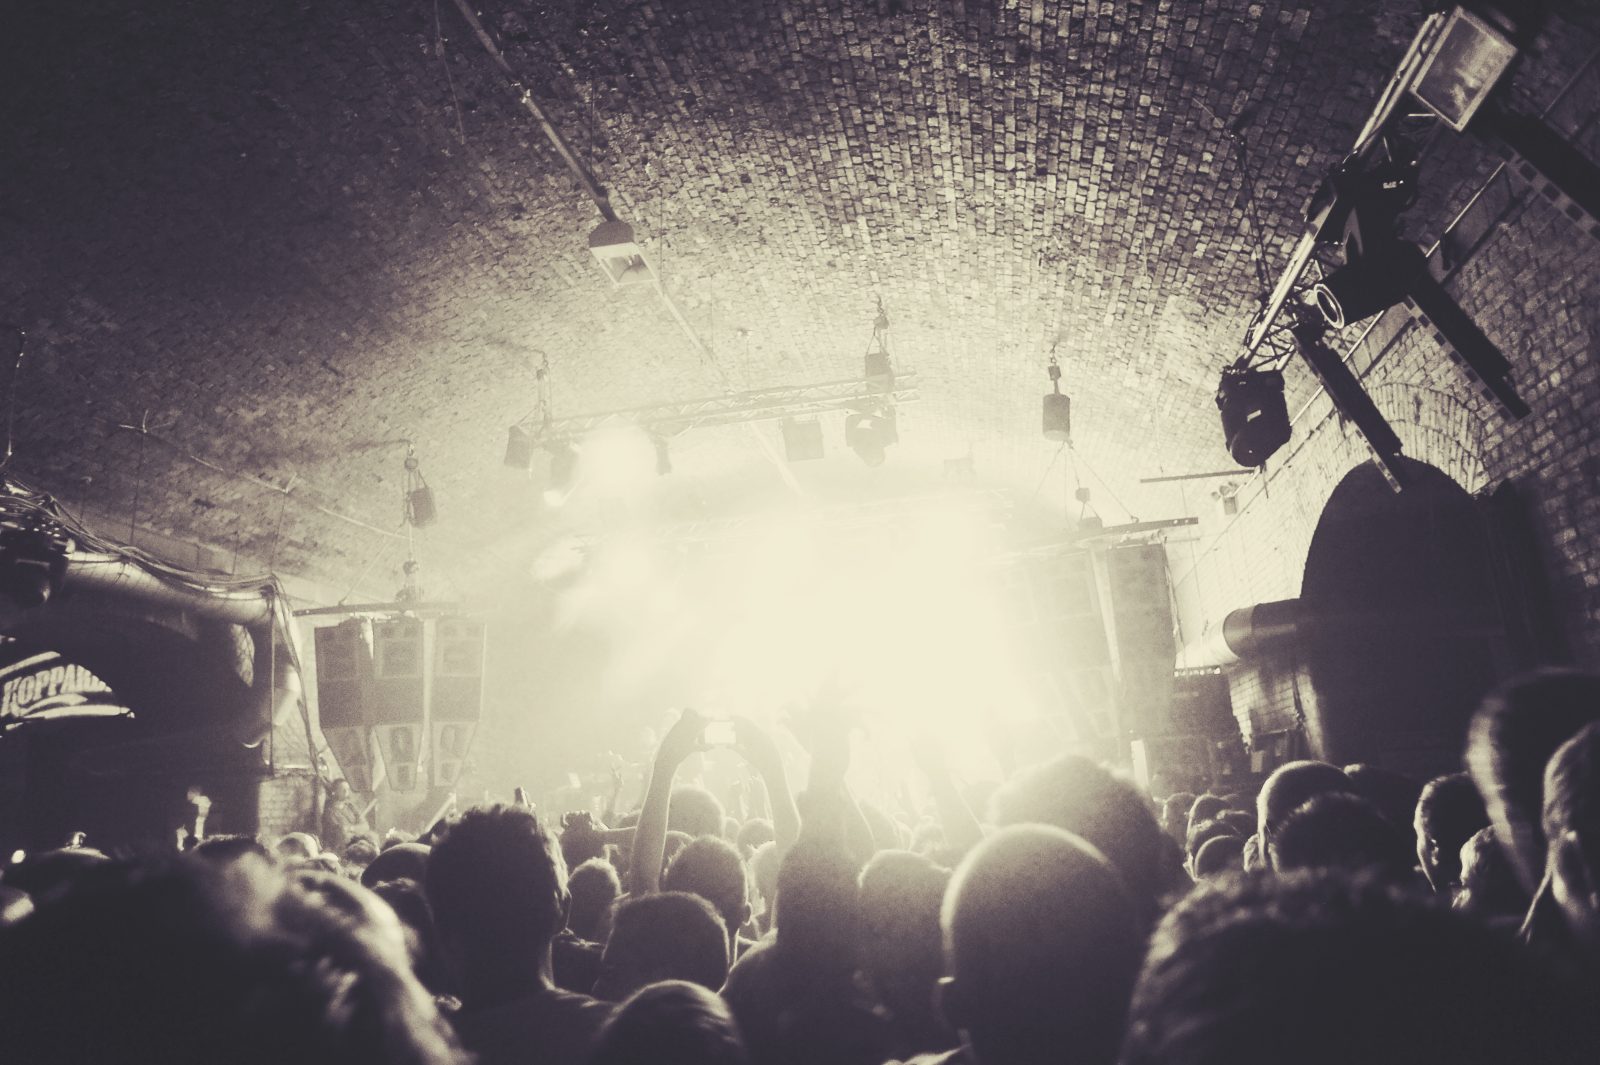 The Warehouse Project in Manchester &#8216;first&#8217; to roll out urine tests for spiking, The Manc